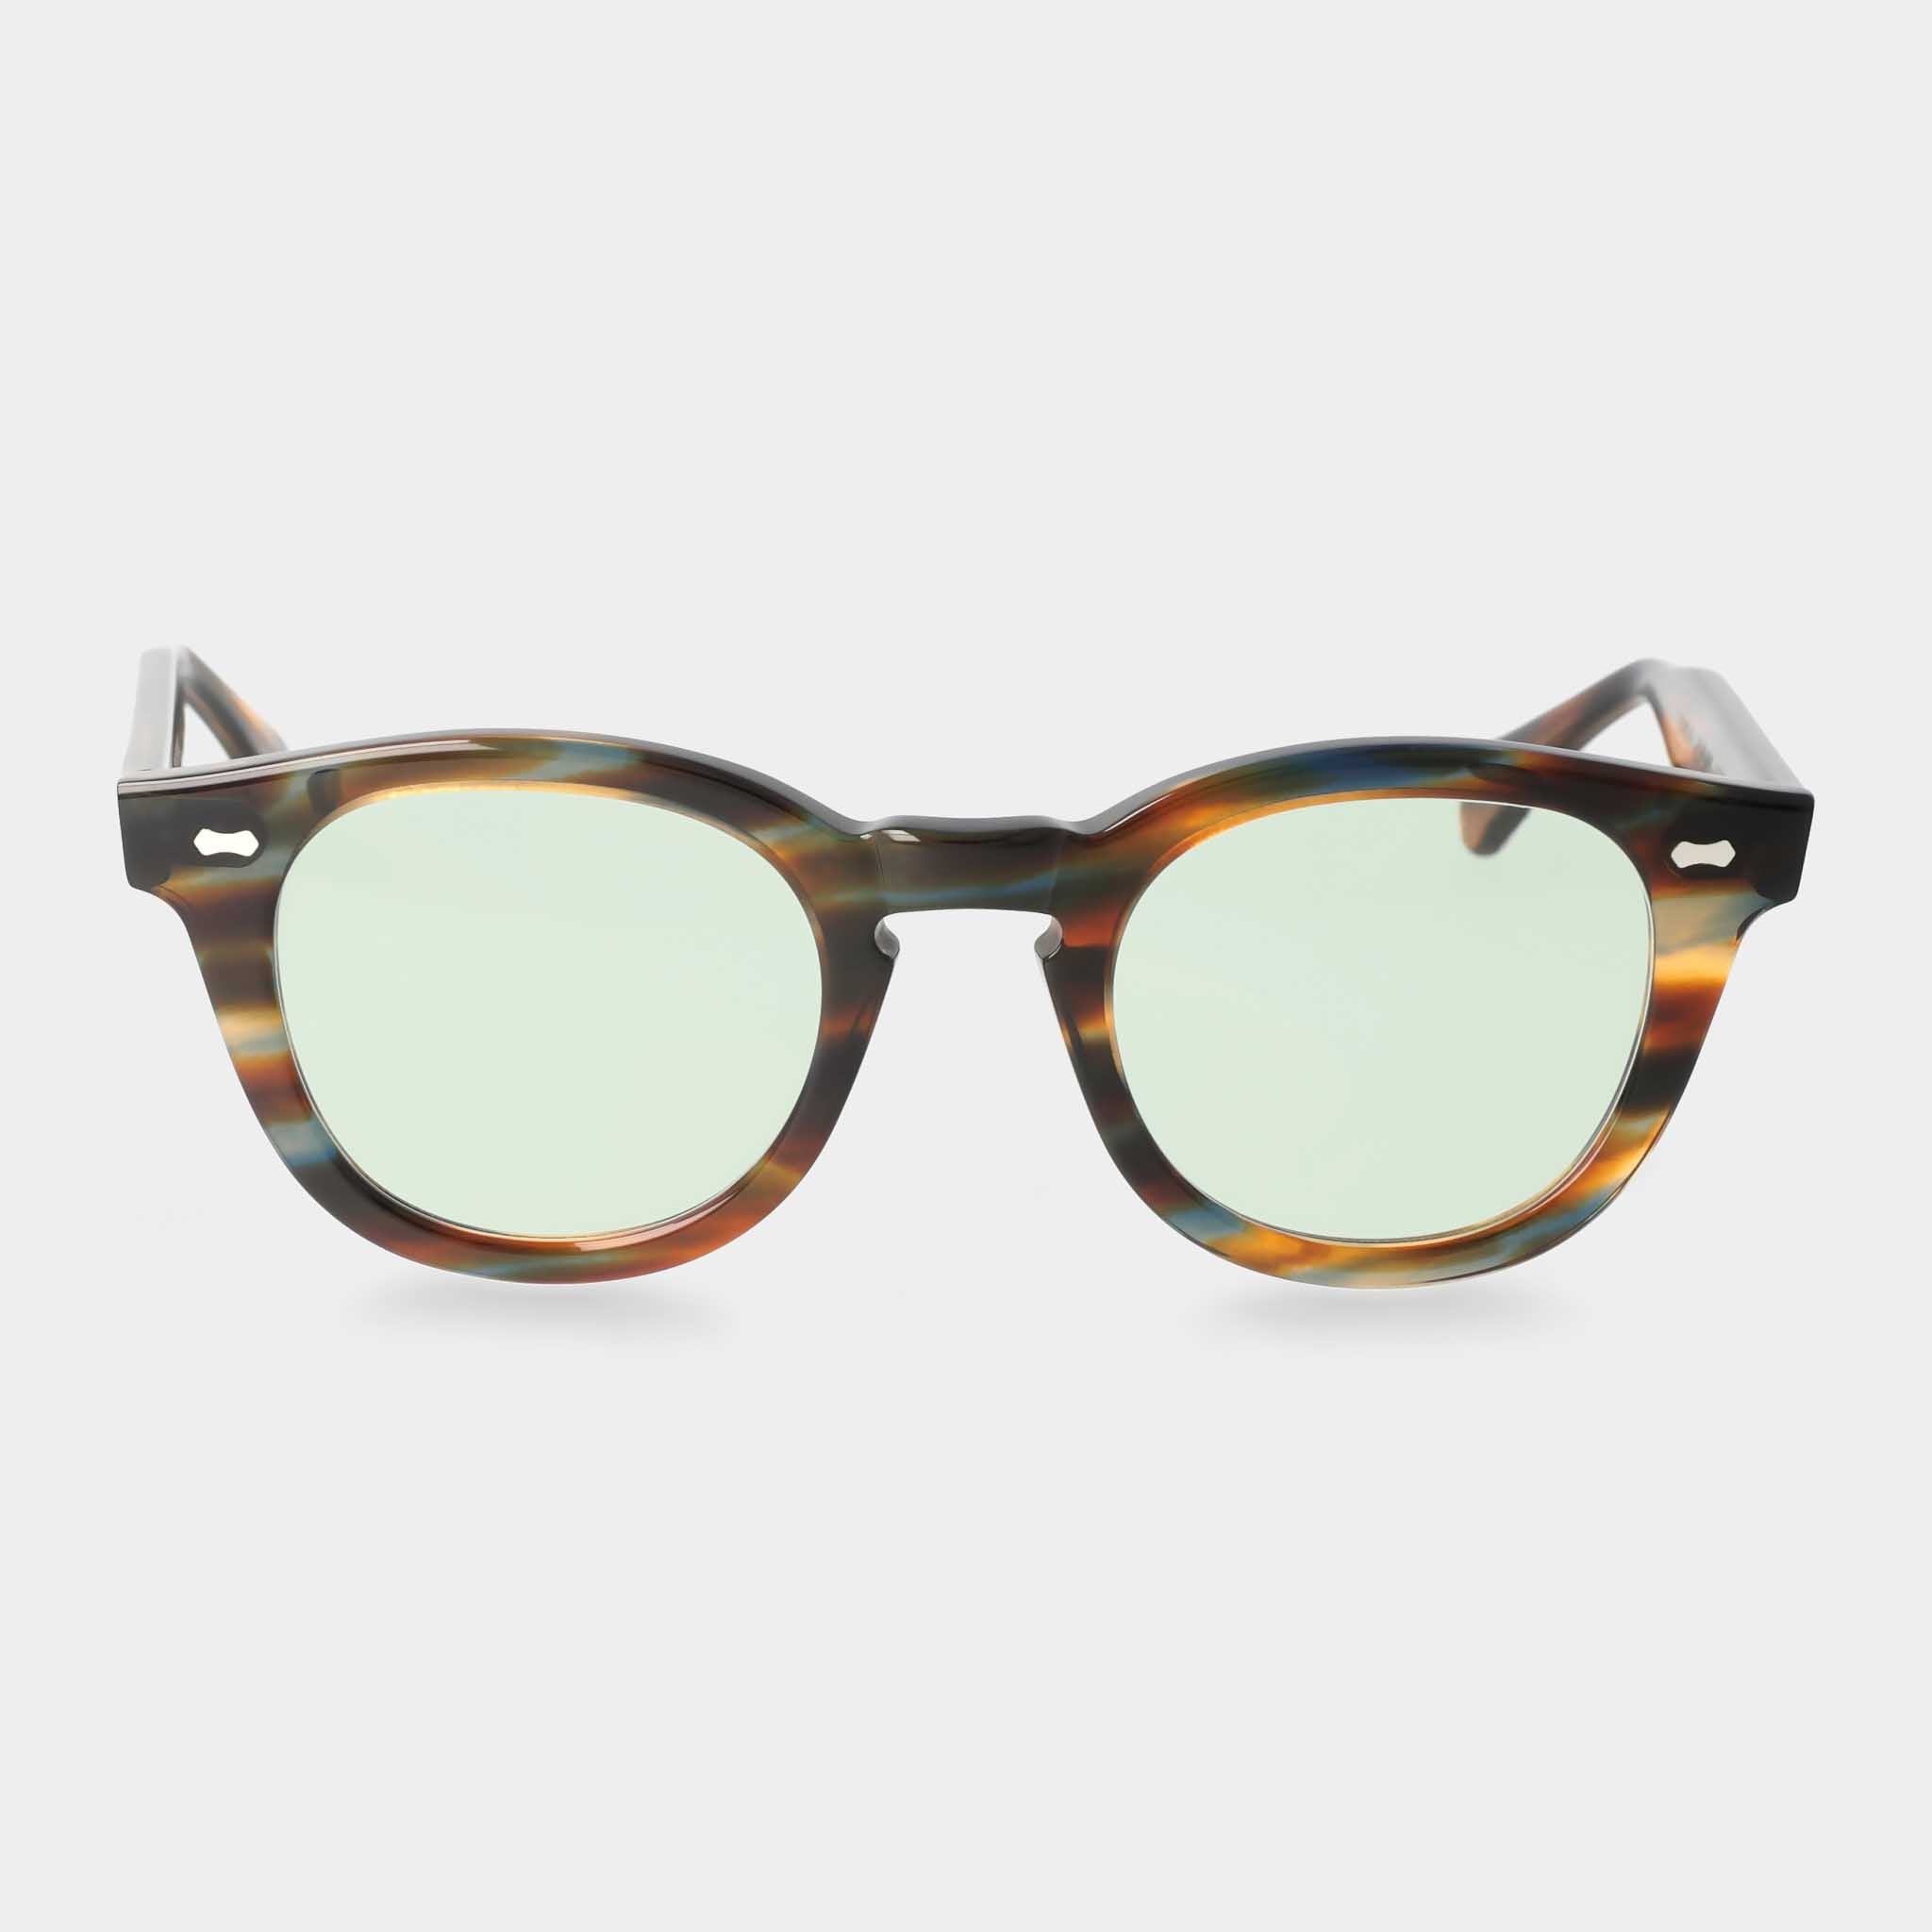 sunglasses-donegal-river-light-green-sustainable-tbd-eyewear-front